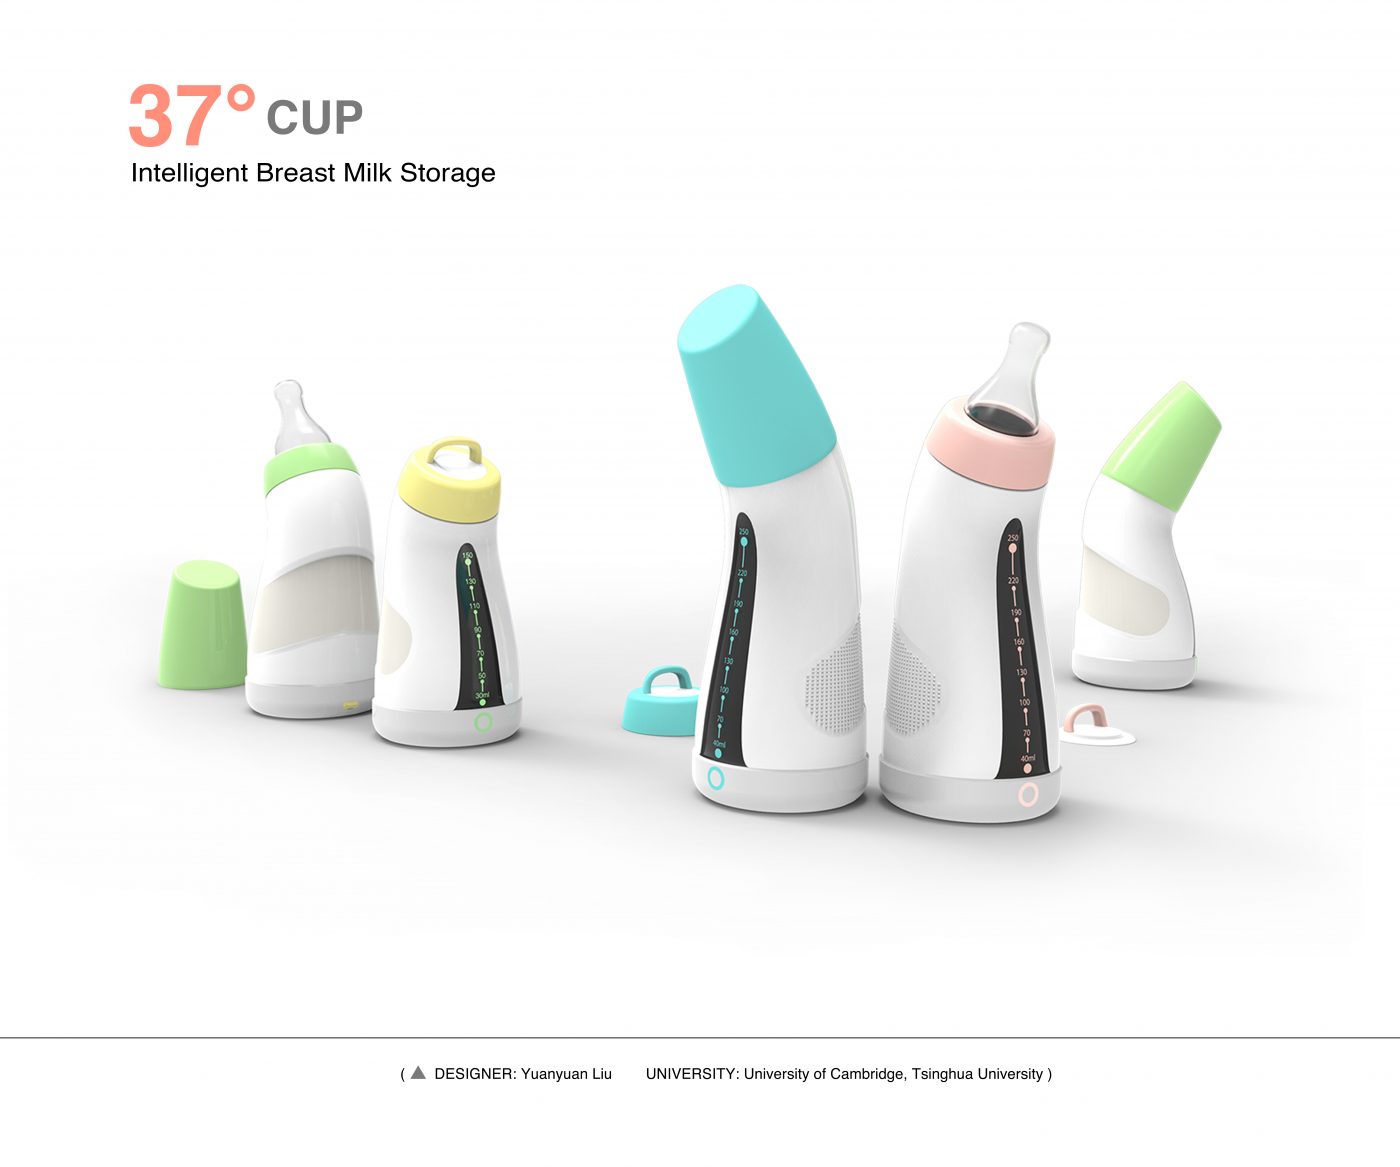 37° CUP